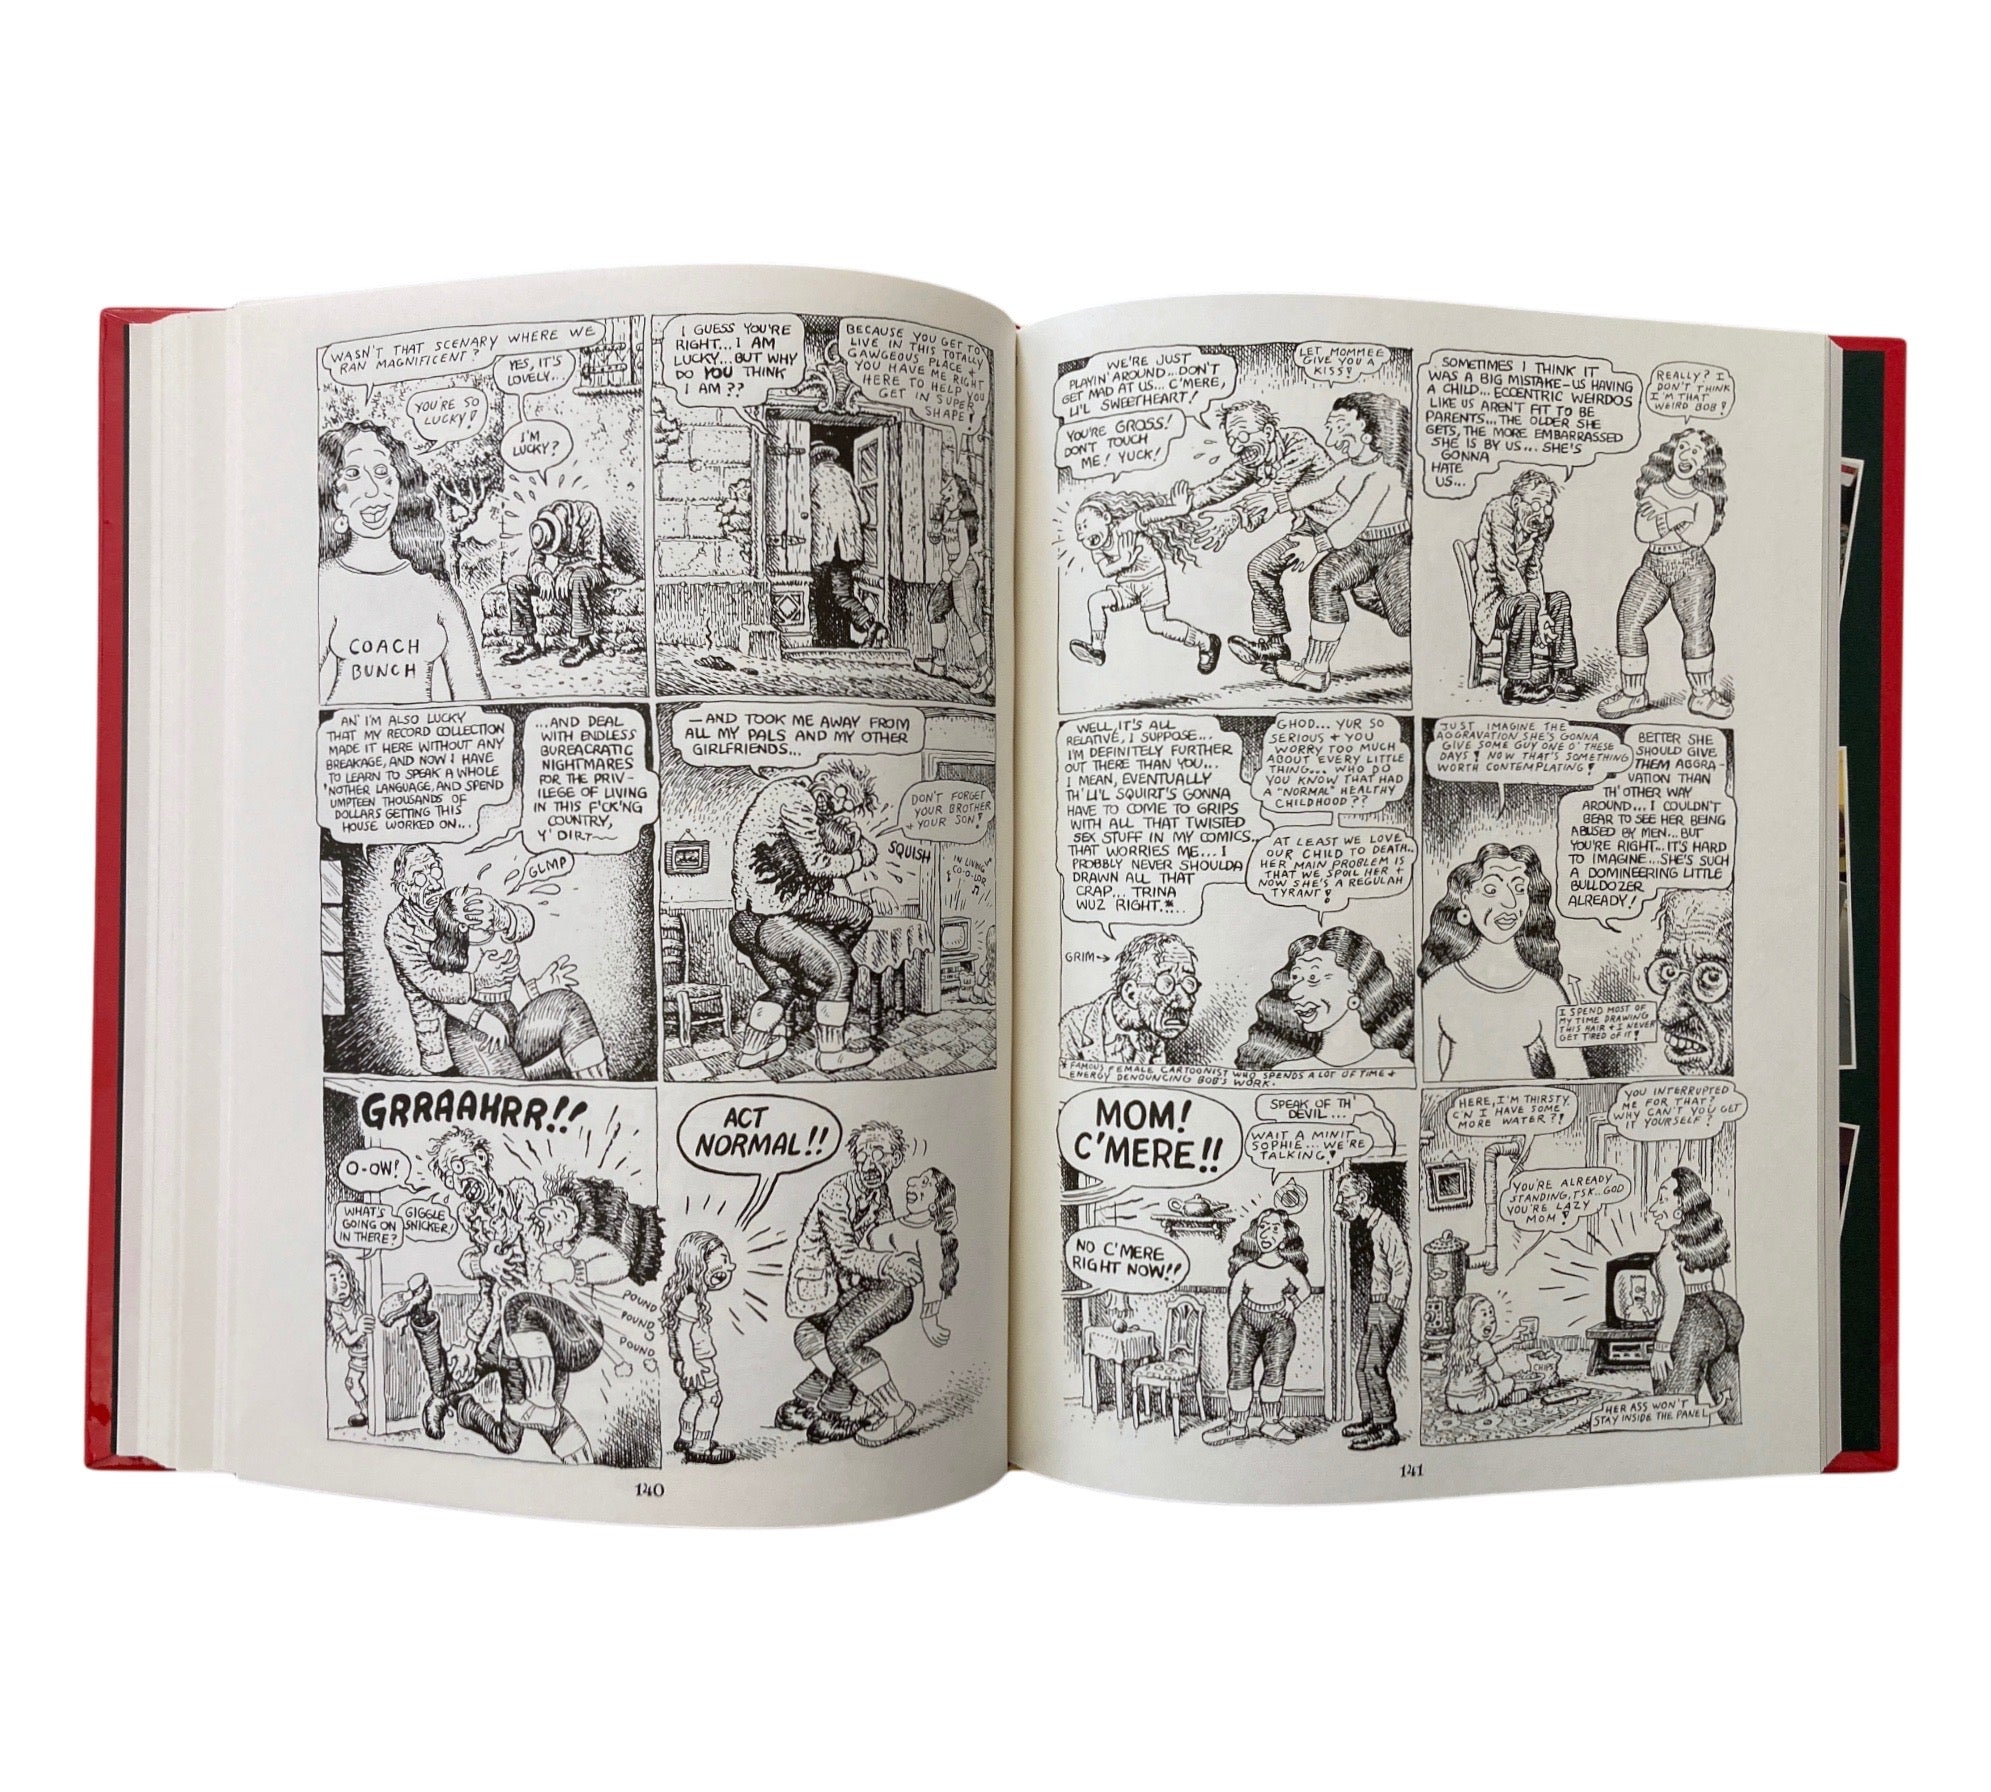 Drawn Together: The Collected Works of R. and A. Crumb